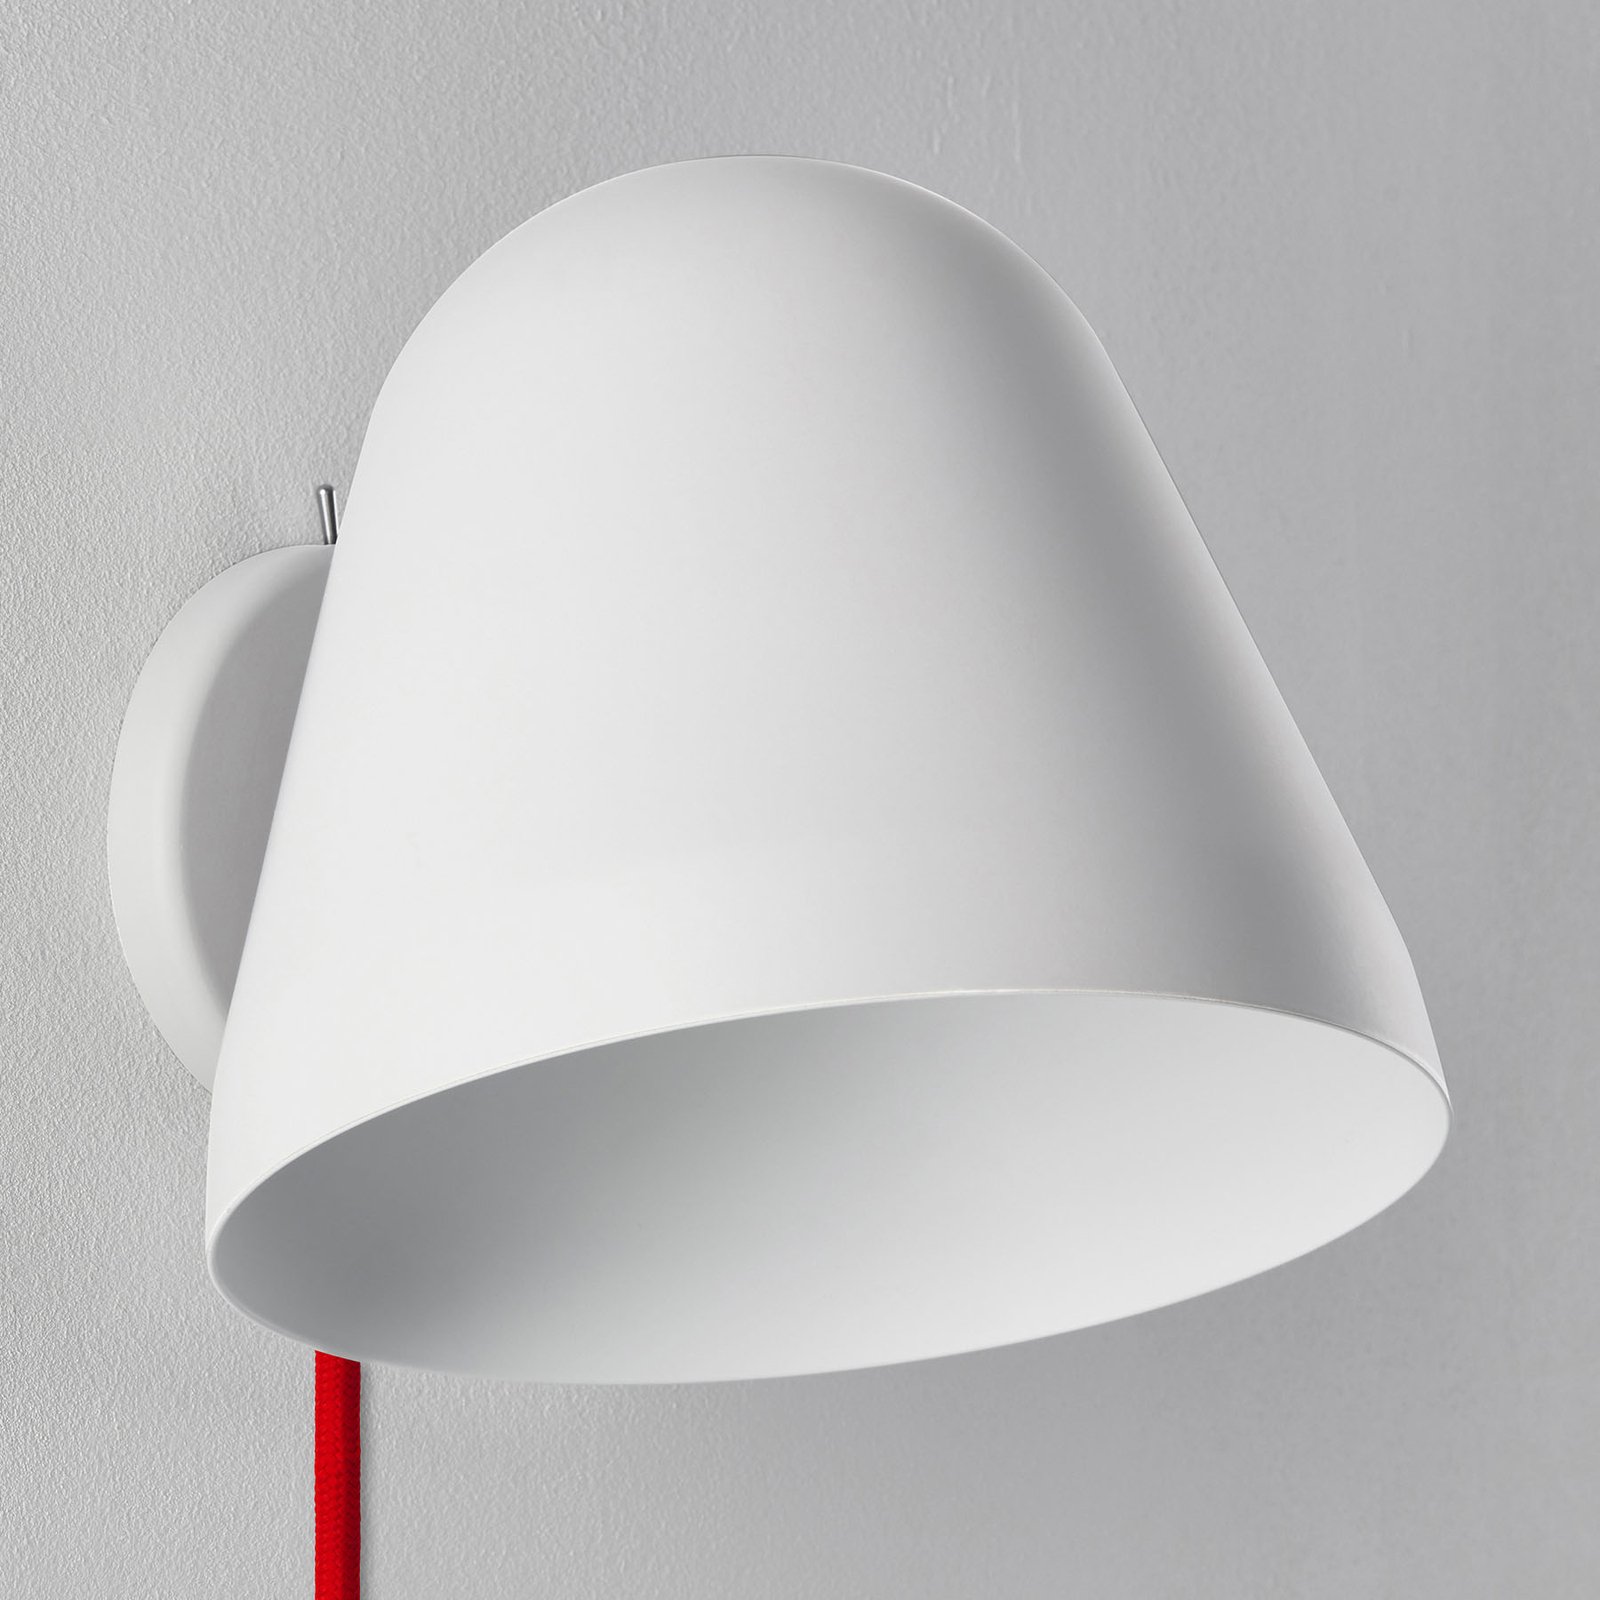 Nyta Tilt Wall Short wall lamp, red cable, white